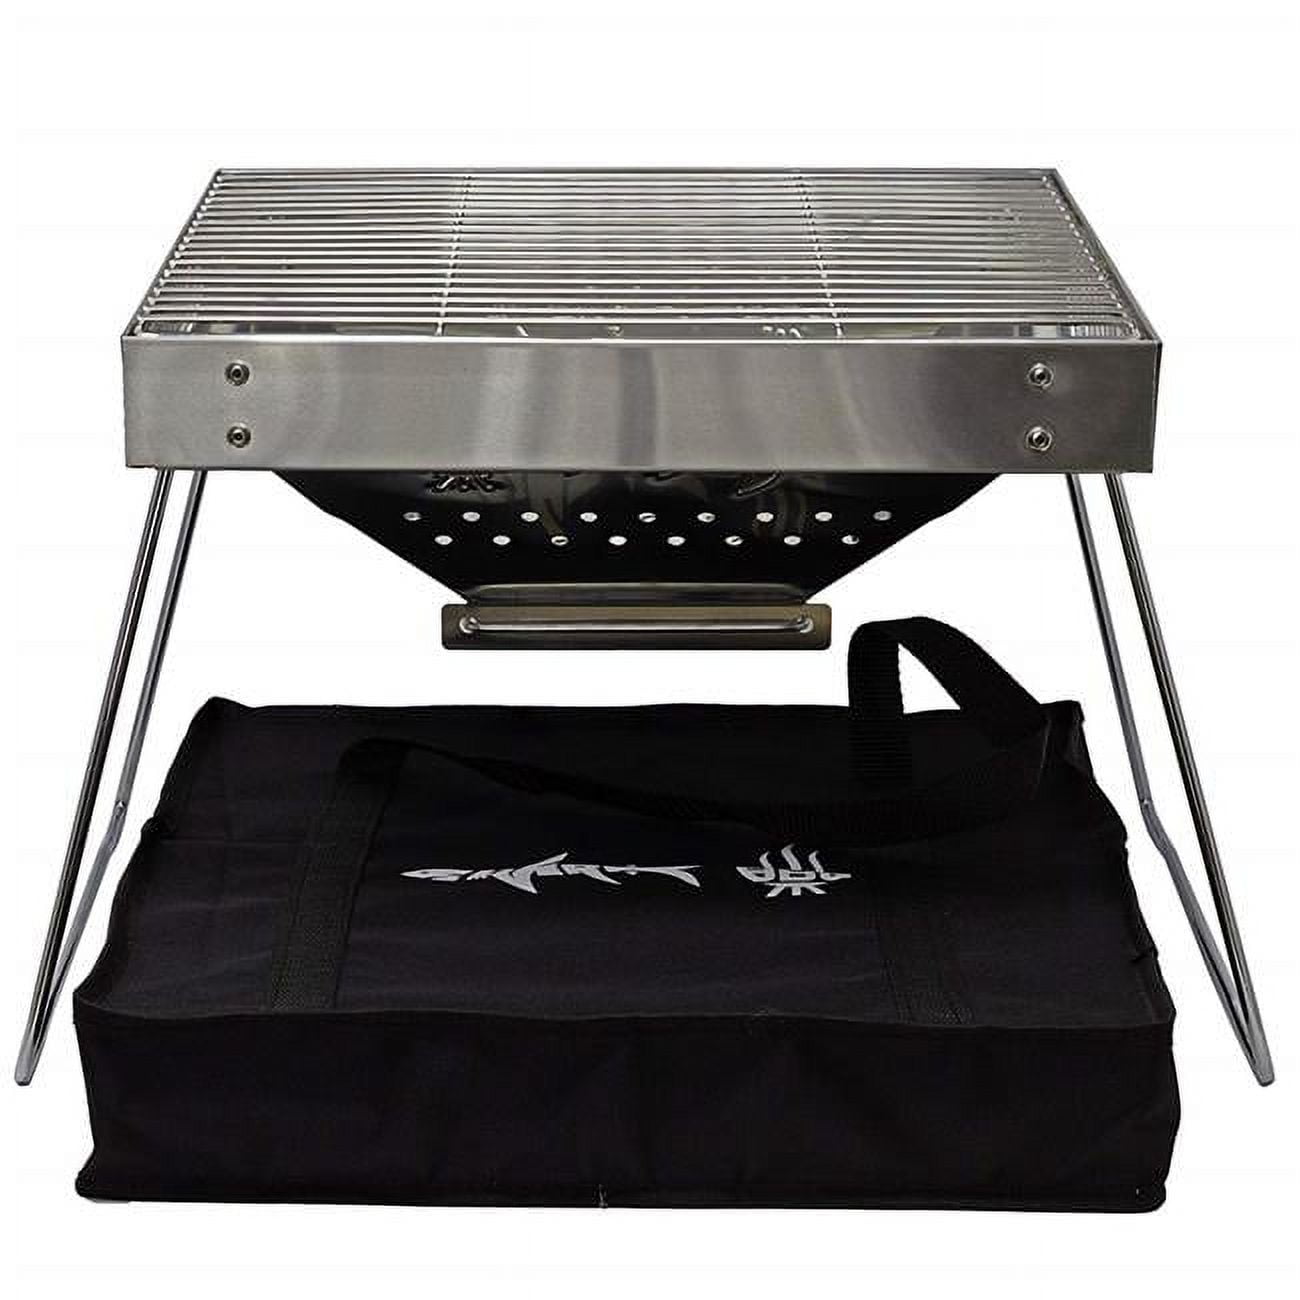 16 Portable Charcoal Grill